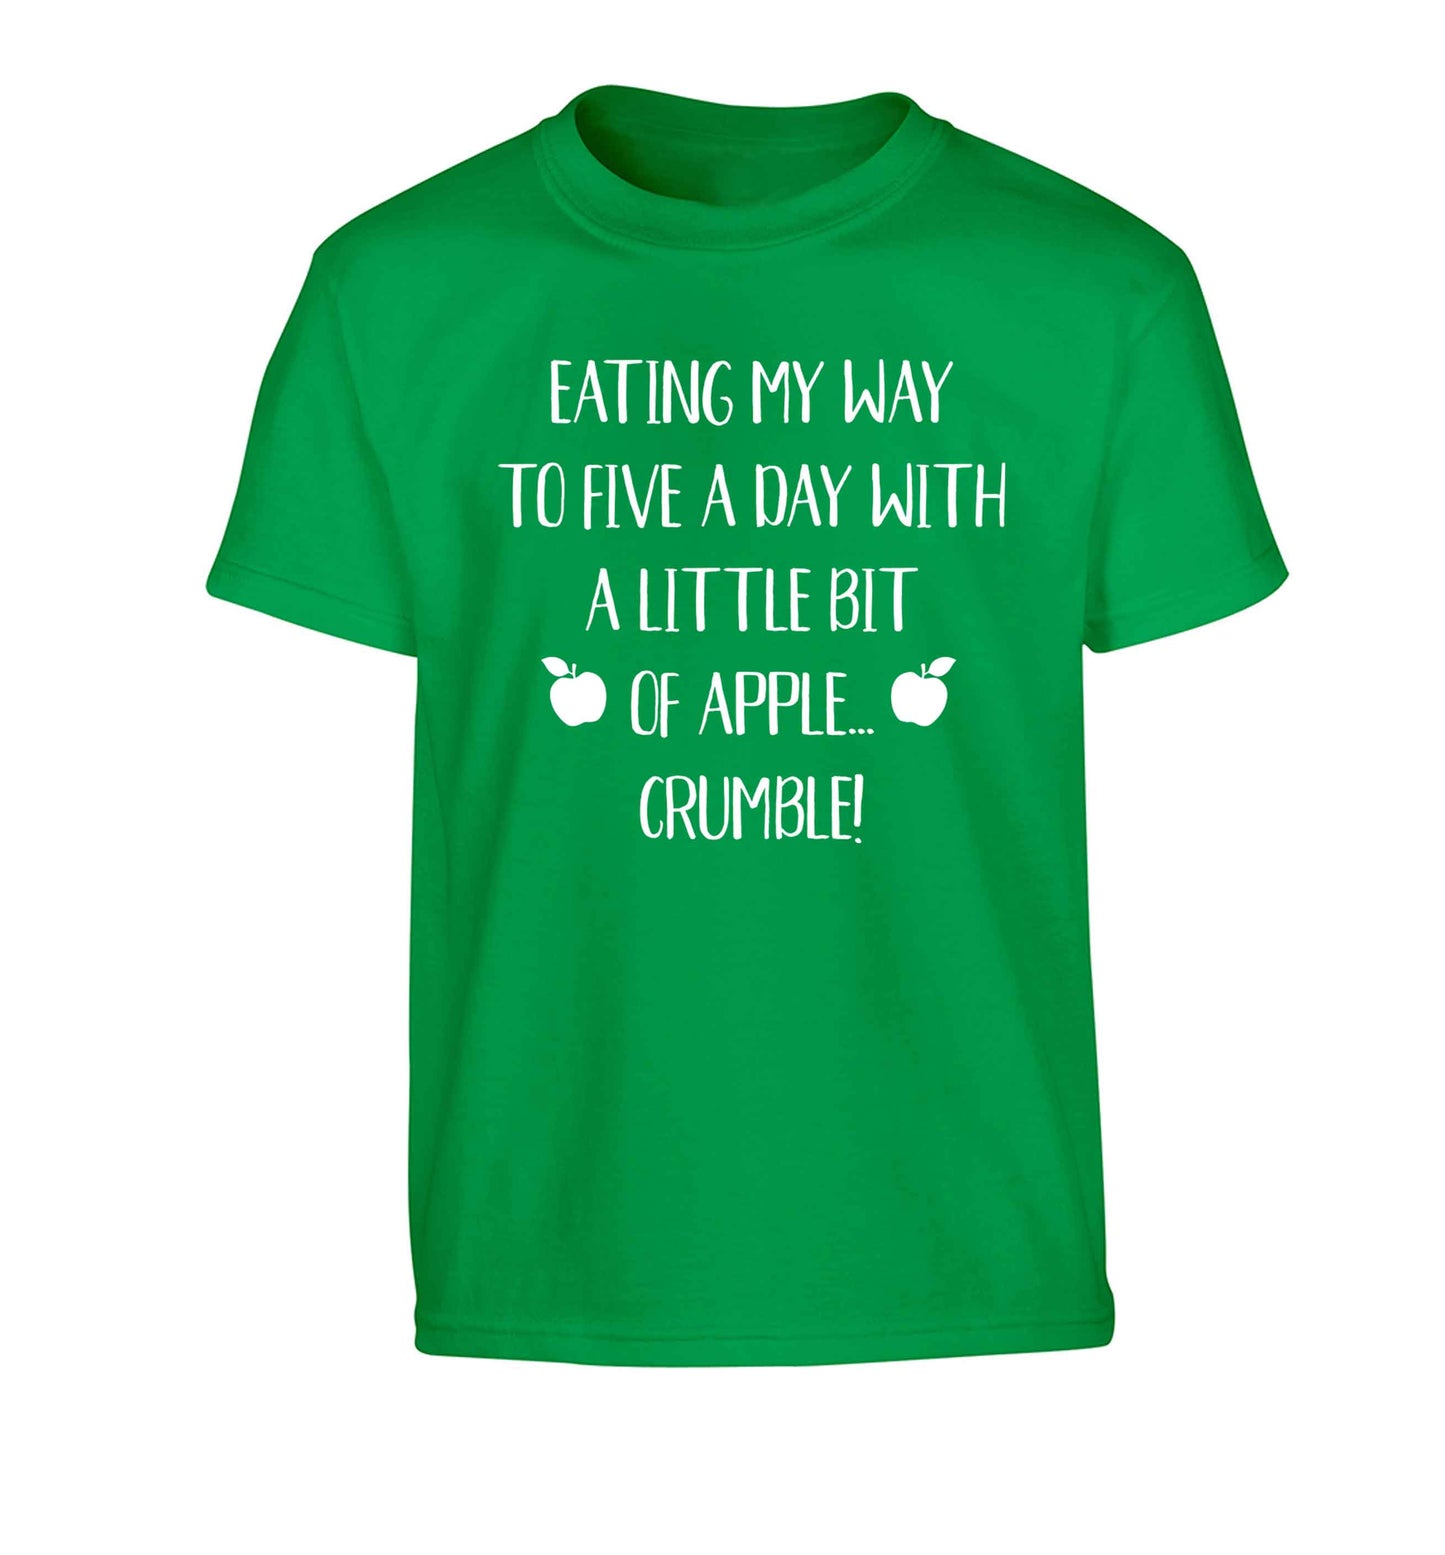 Eating my way to five a day with a little bit of apple crumble Children's green Tshirt 12-13 Years